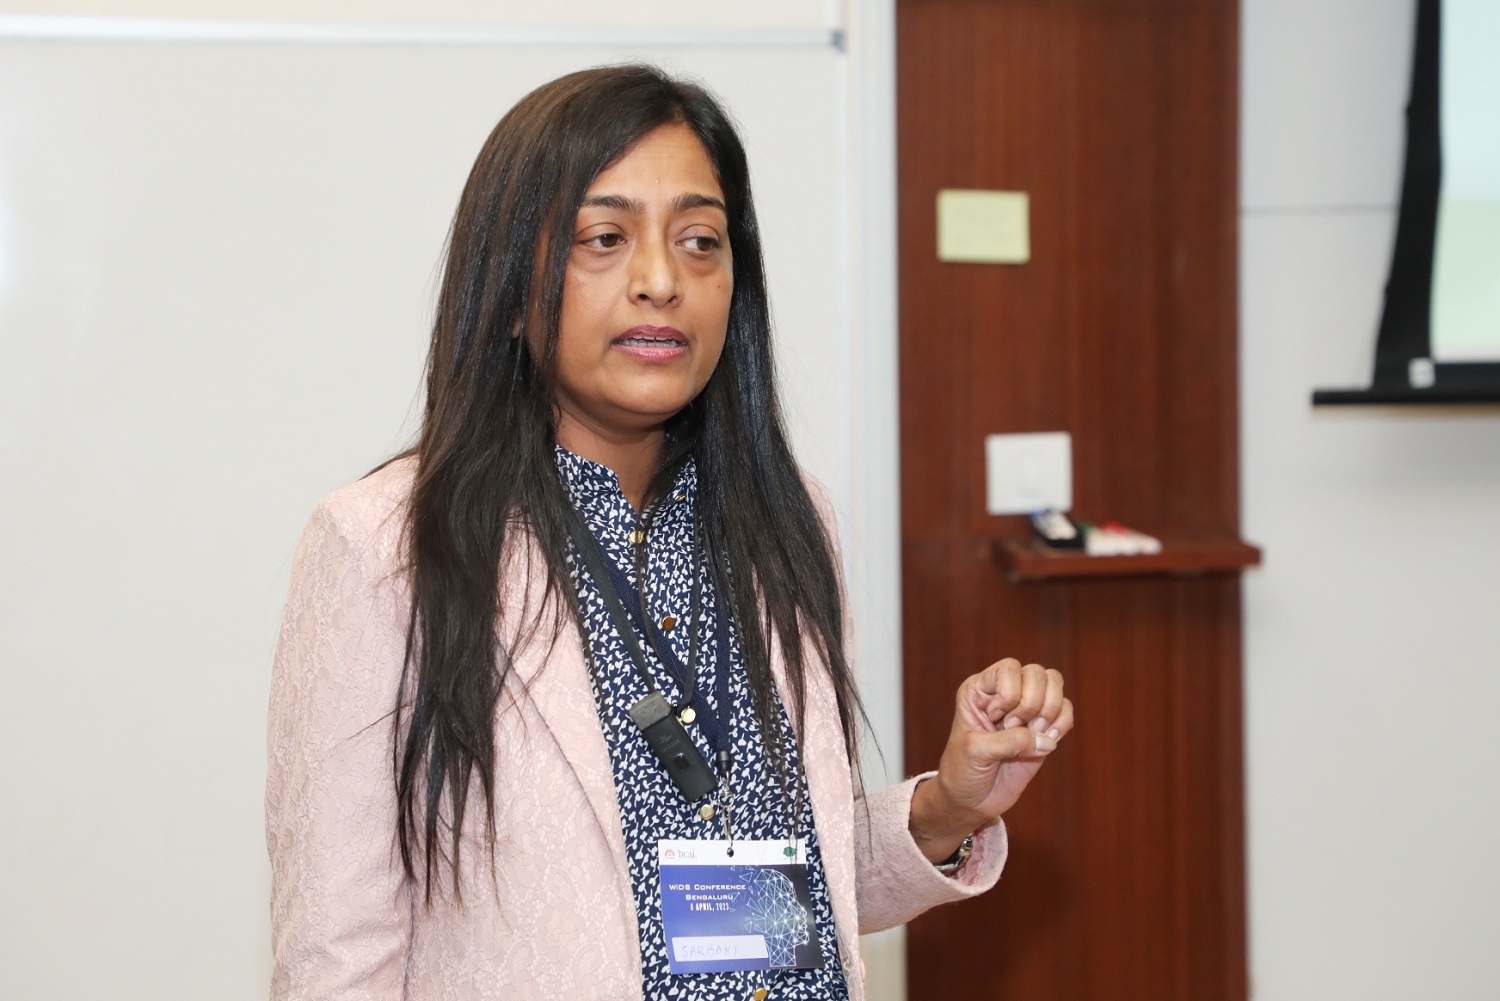 Sarbani Maiti, Vice President Data Science, Veersa Technologies, spoke on 'AI in Healthcare : The Power of NLP in Clinical Text Processing' at WiDS Bengaluru Conference.